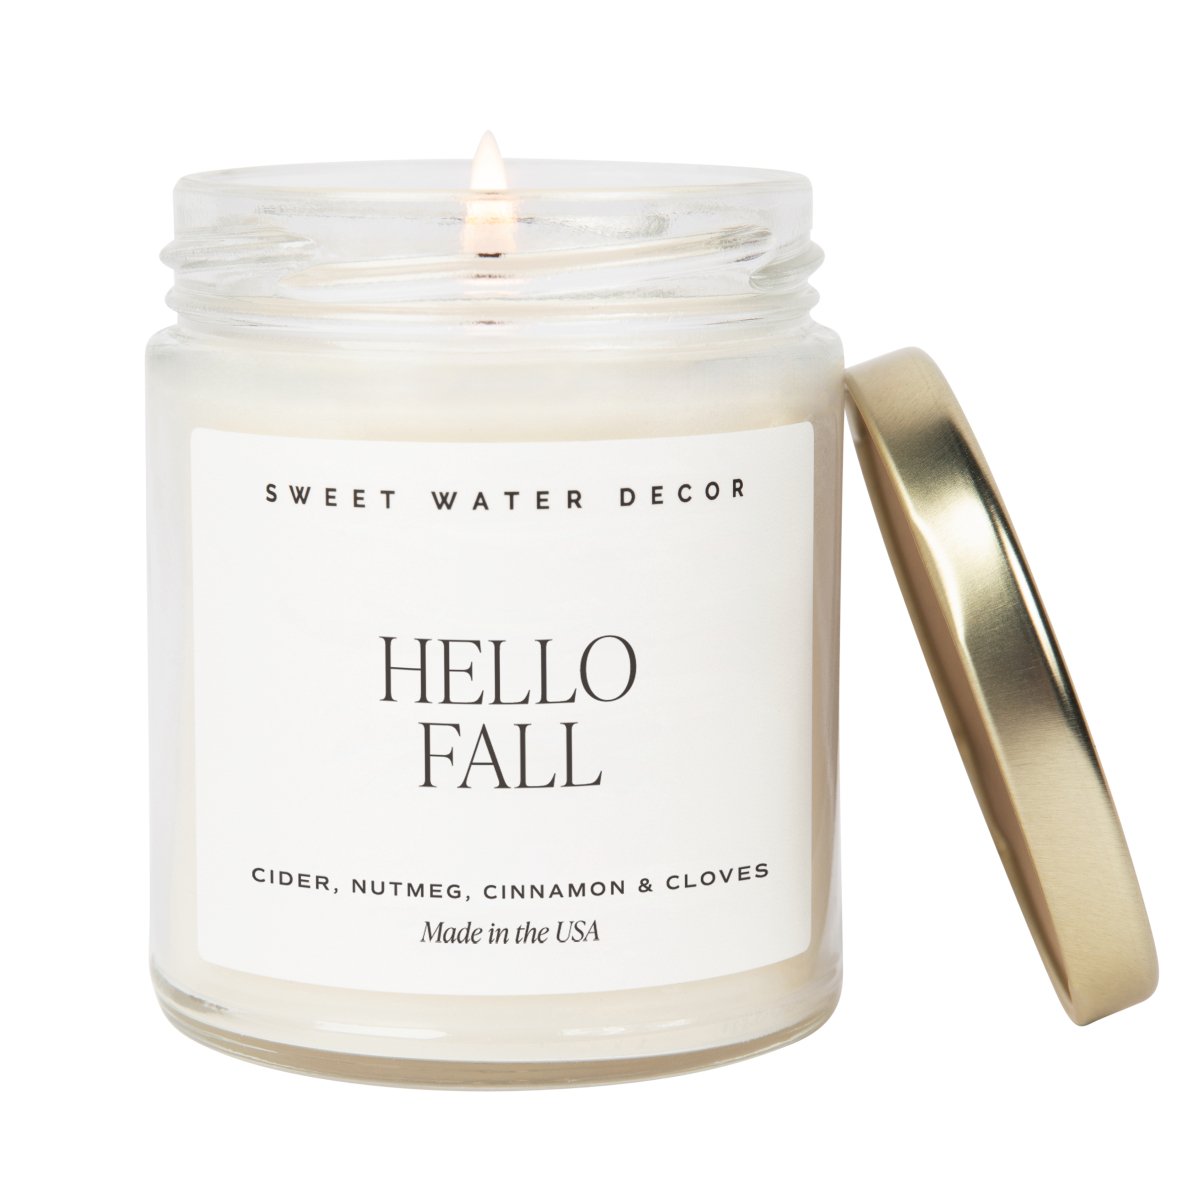 Sweet Water Decor Hello Fall Soy Candle - Clear Jar - 9 oz - lily & onyx